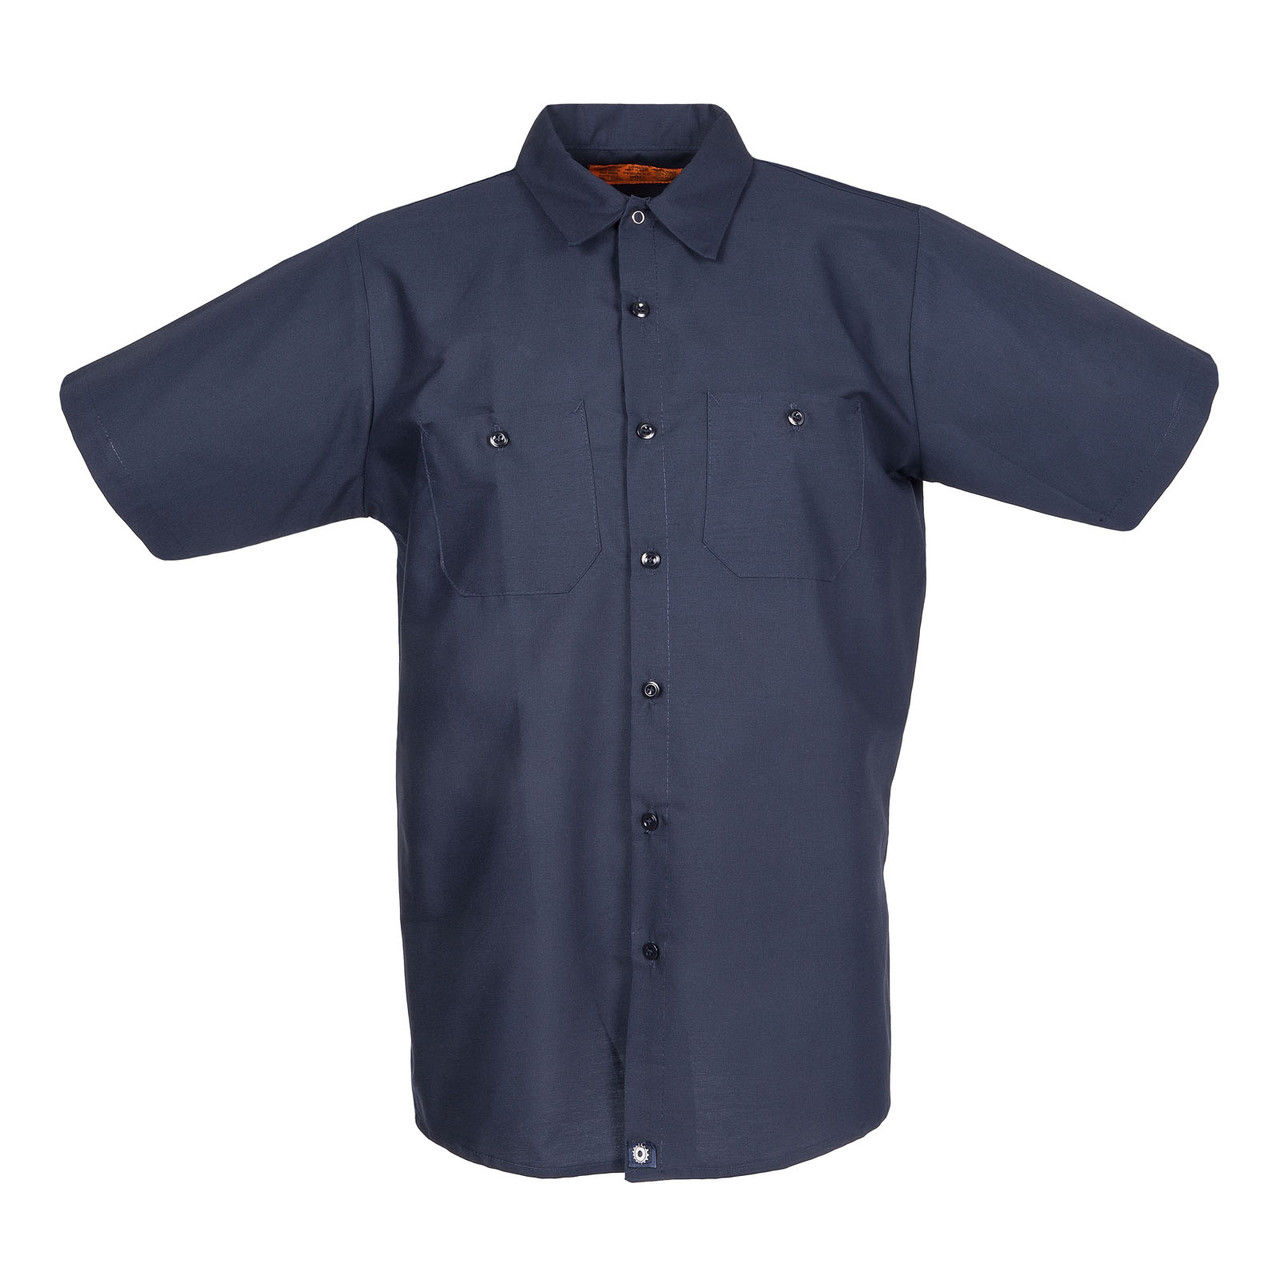 What features does the S12NV mens navy blue short sleeve industrial work shirt have?